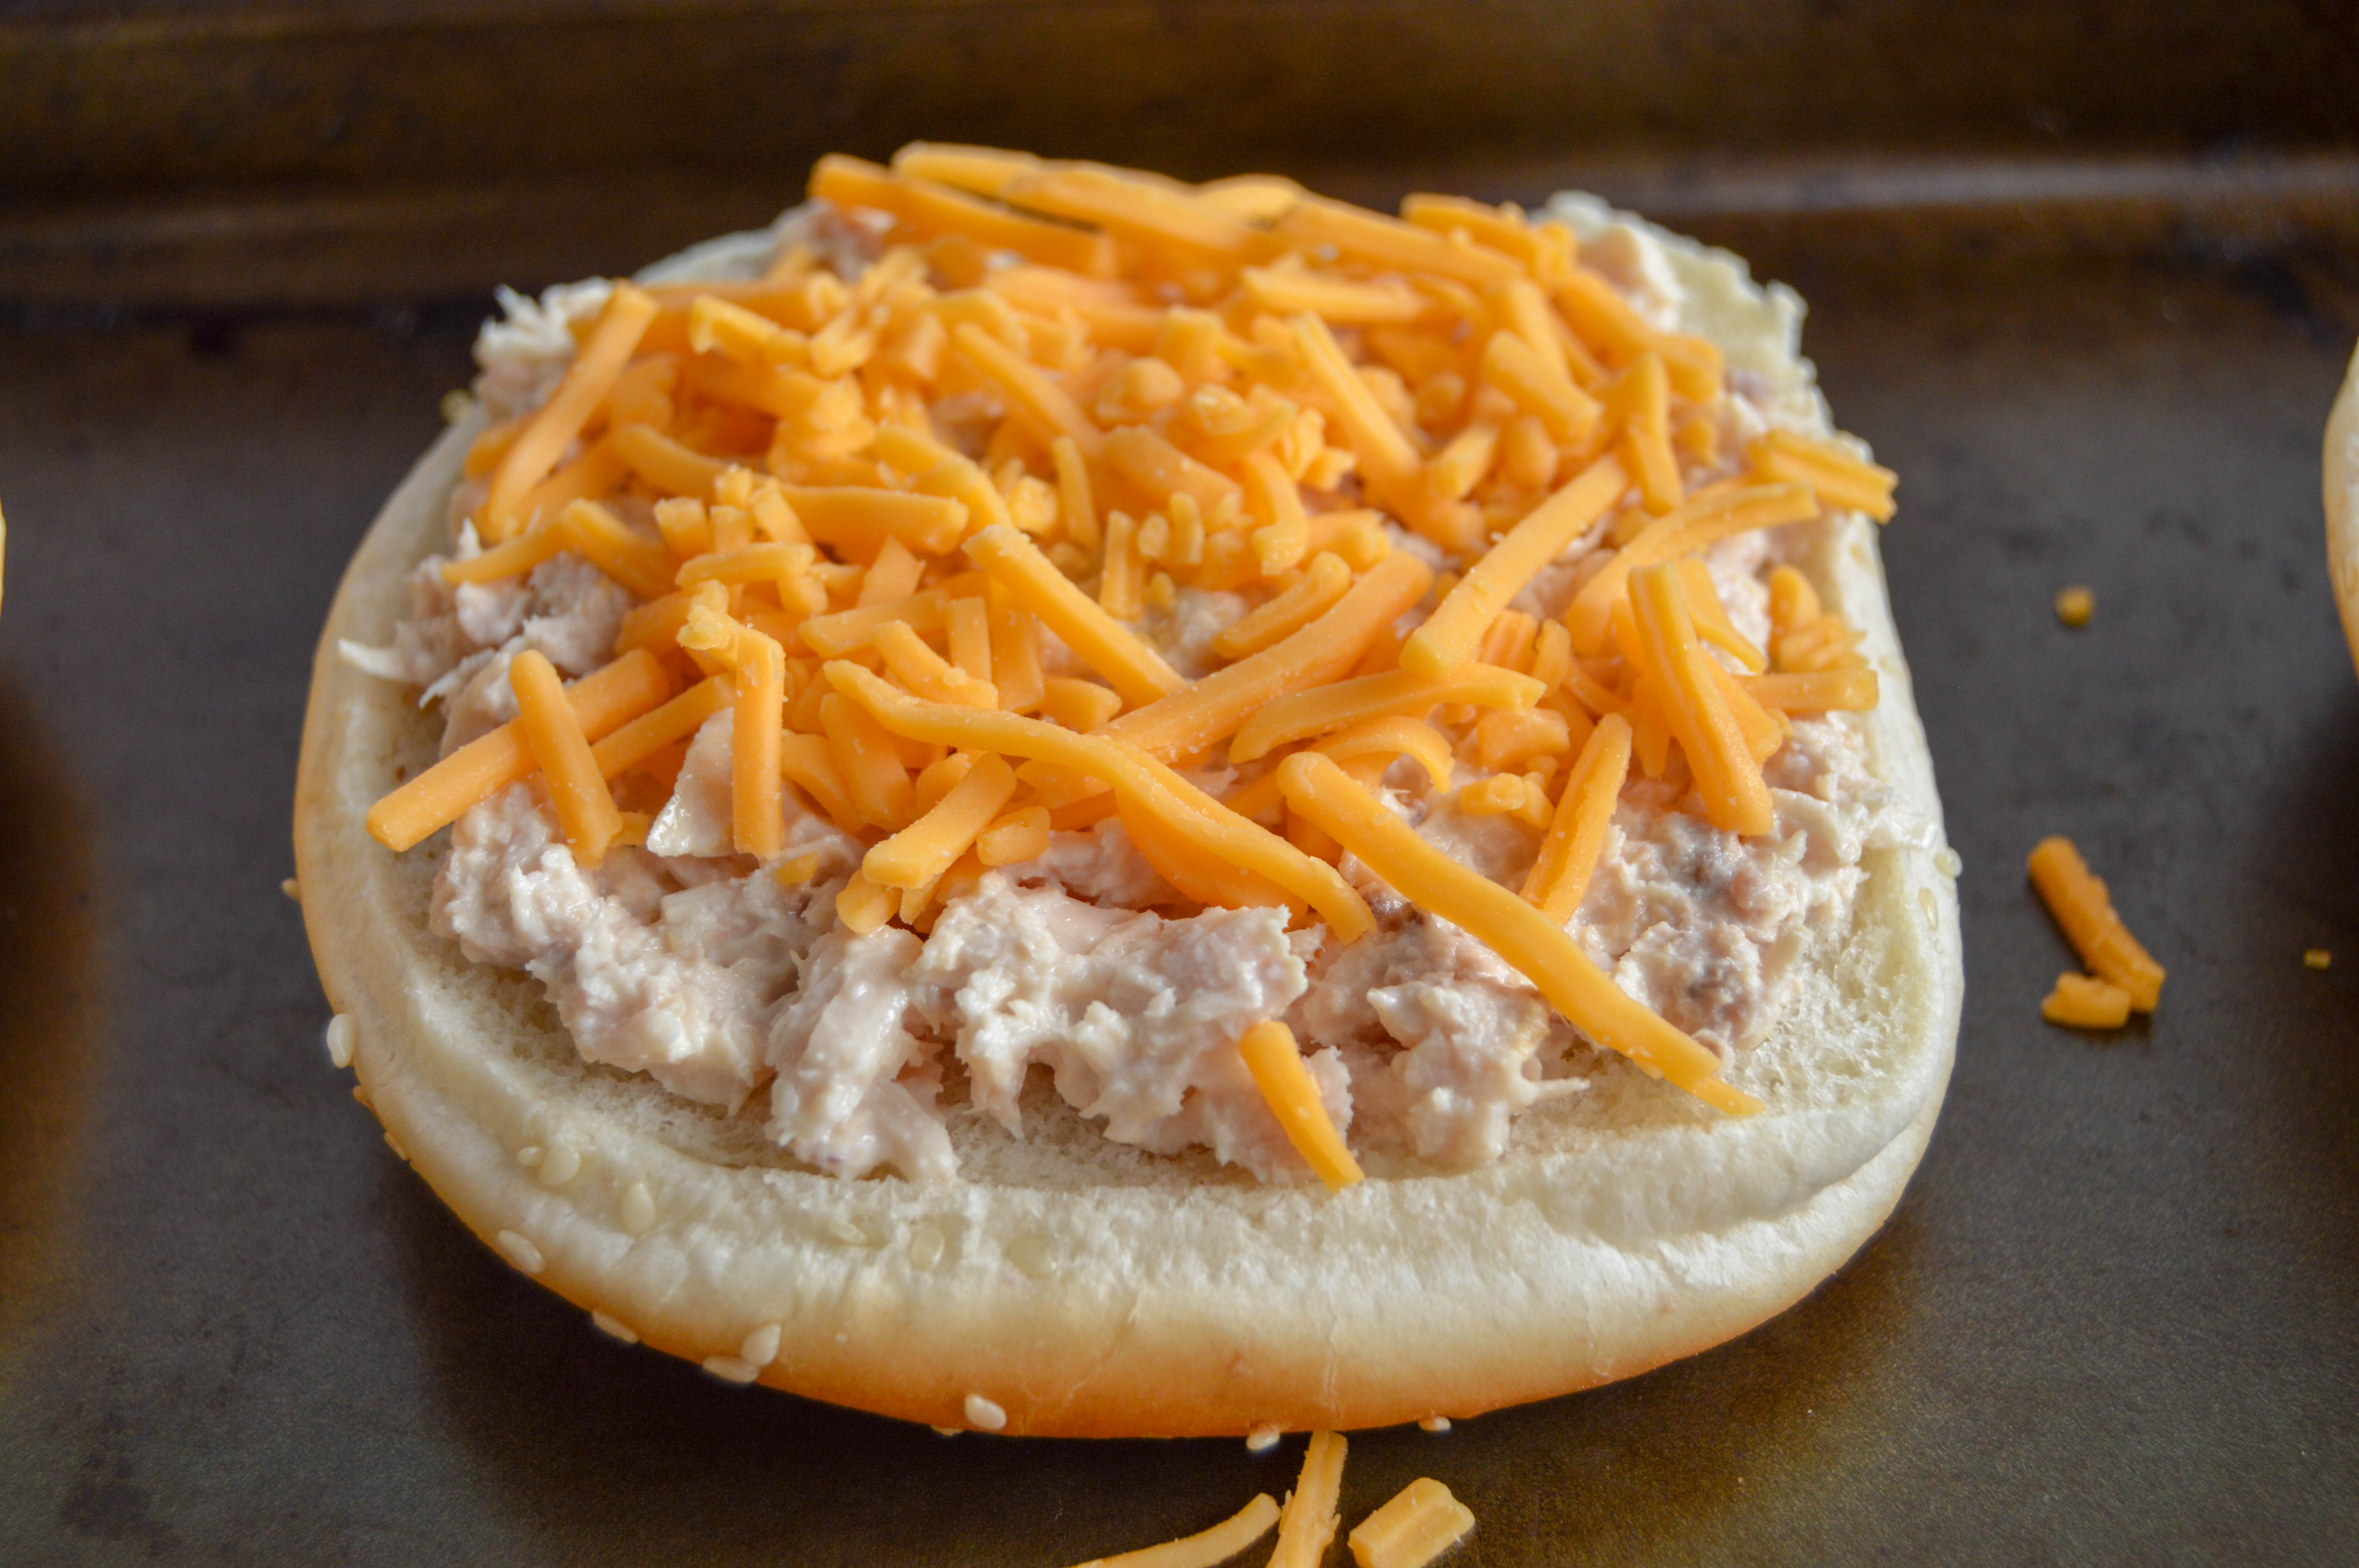 Add the cheddar cheese on the bunwiches.